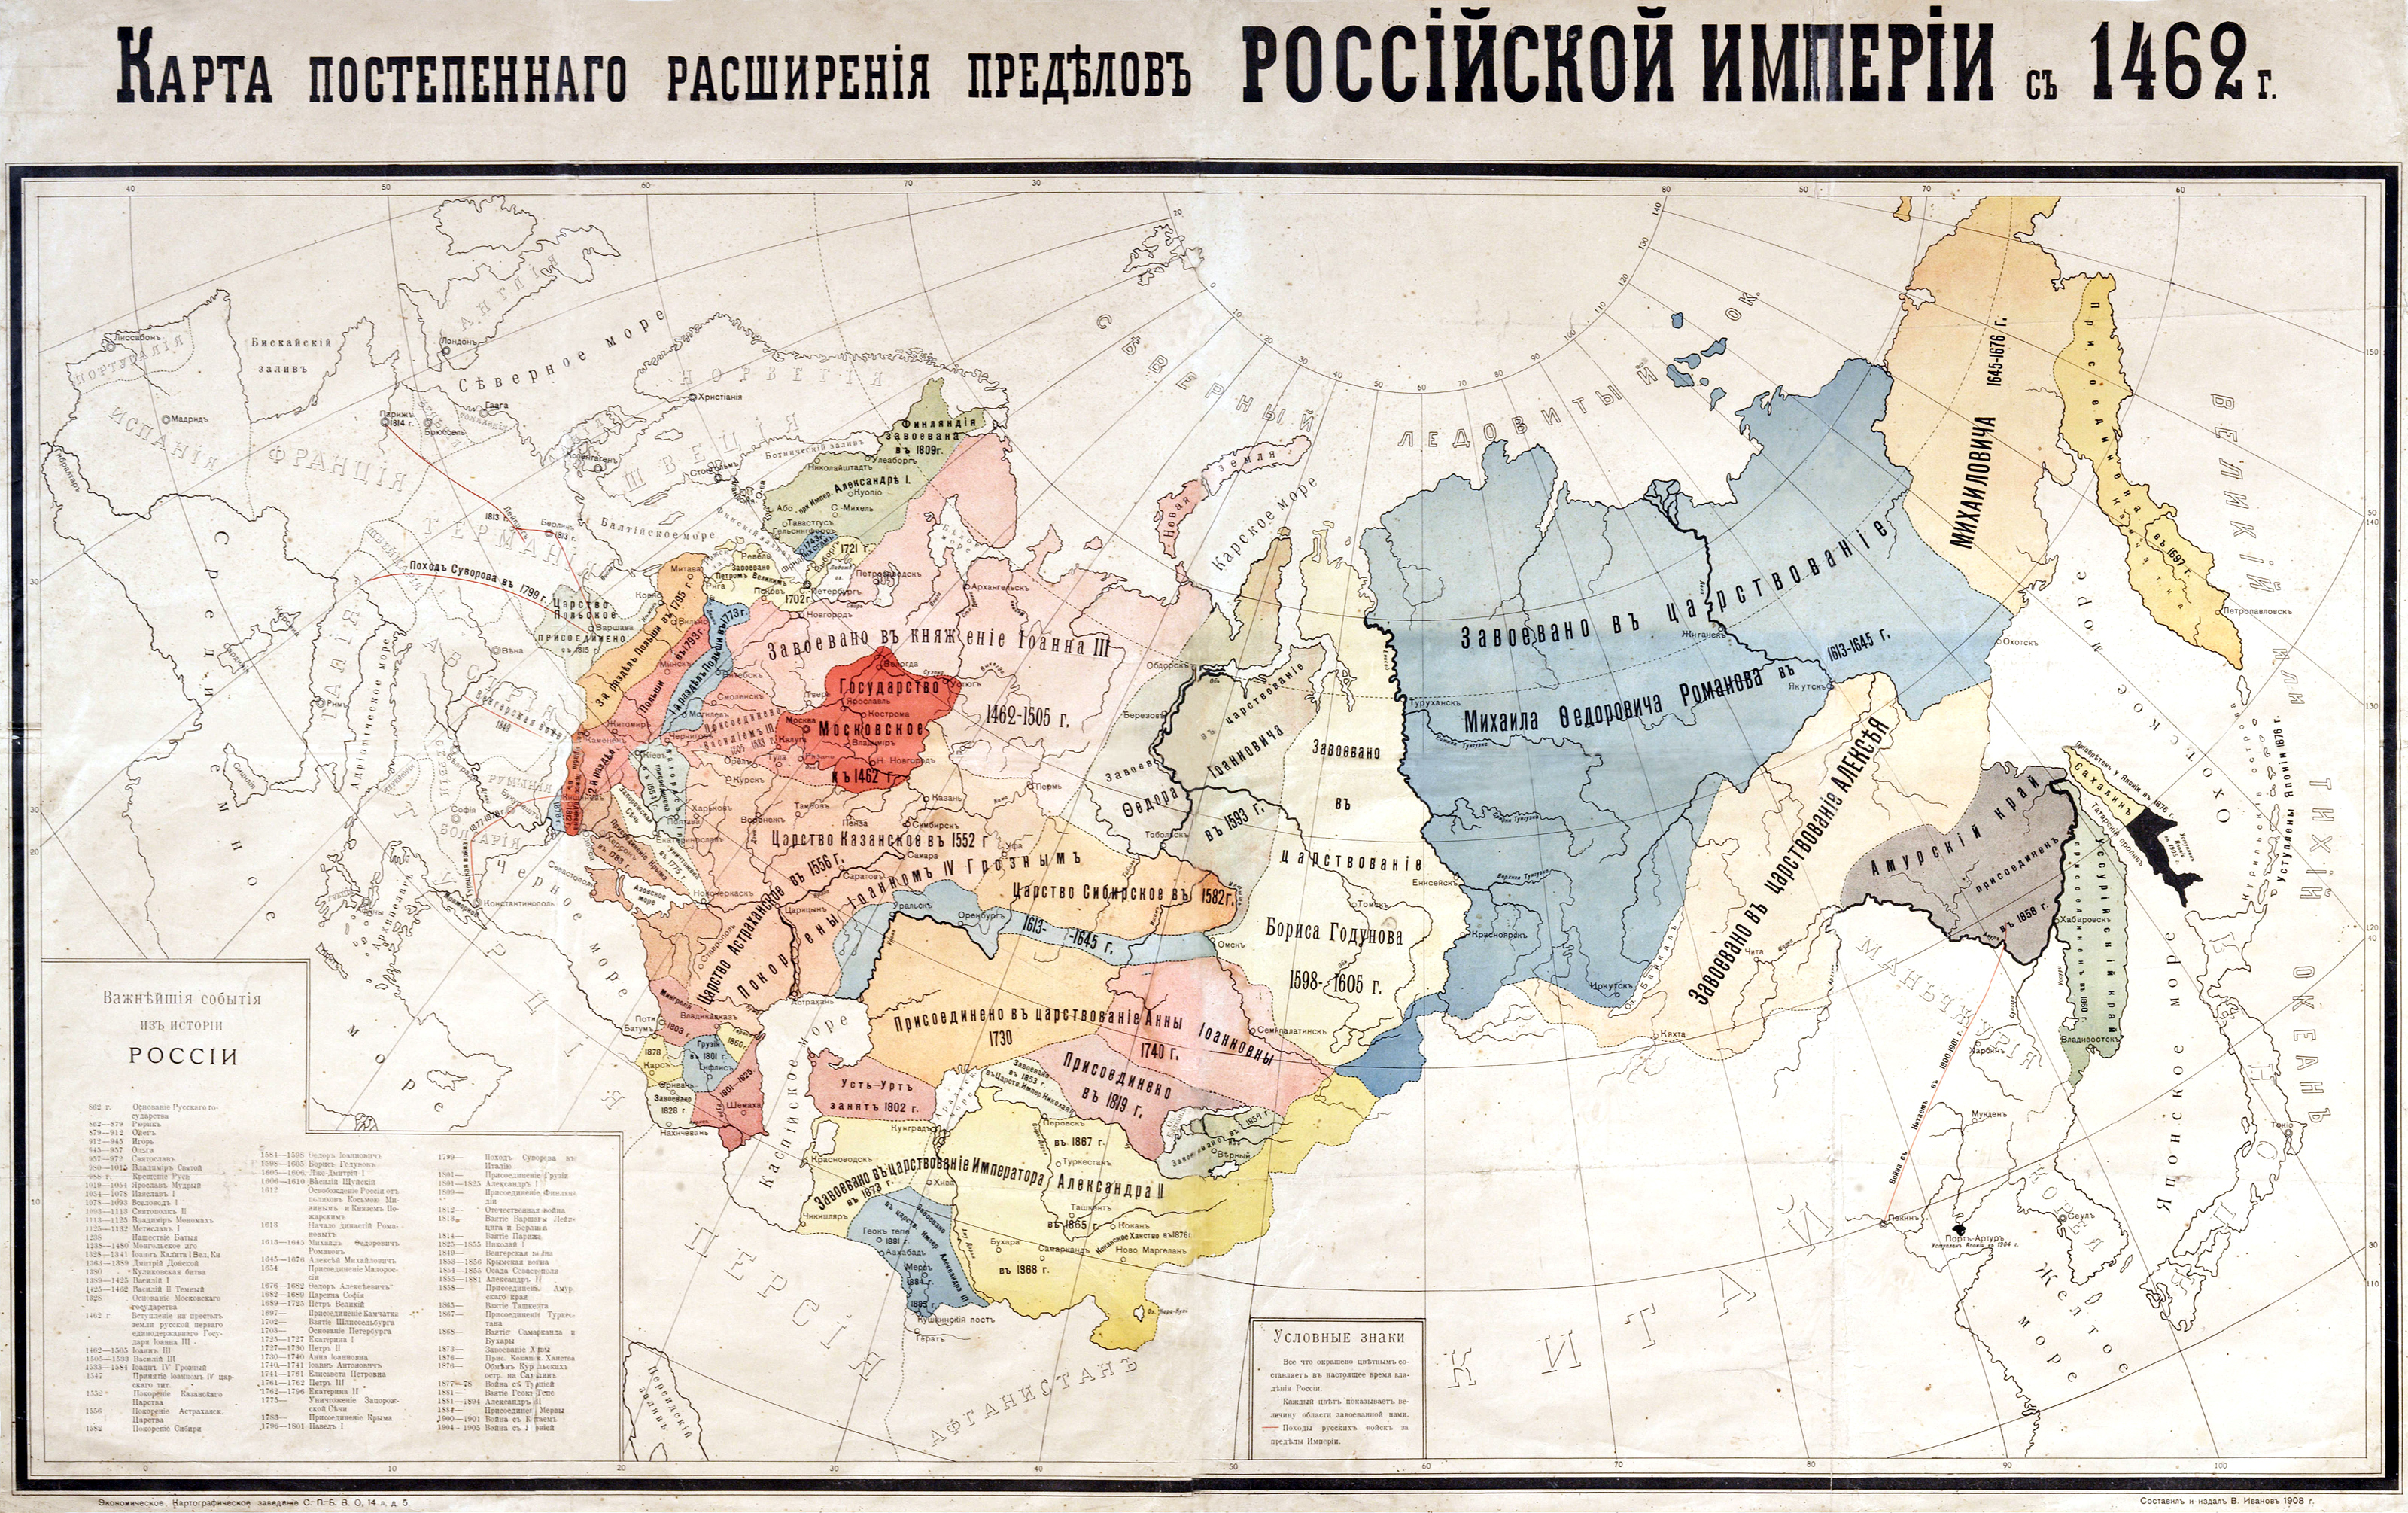 1908. Map of the gradual expansion of the borders of the Russian Empire since 1462